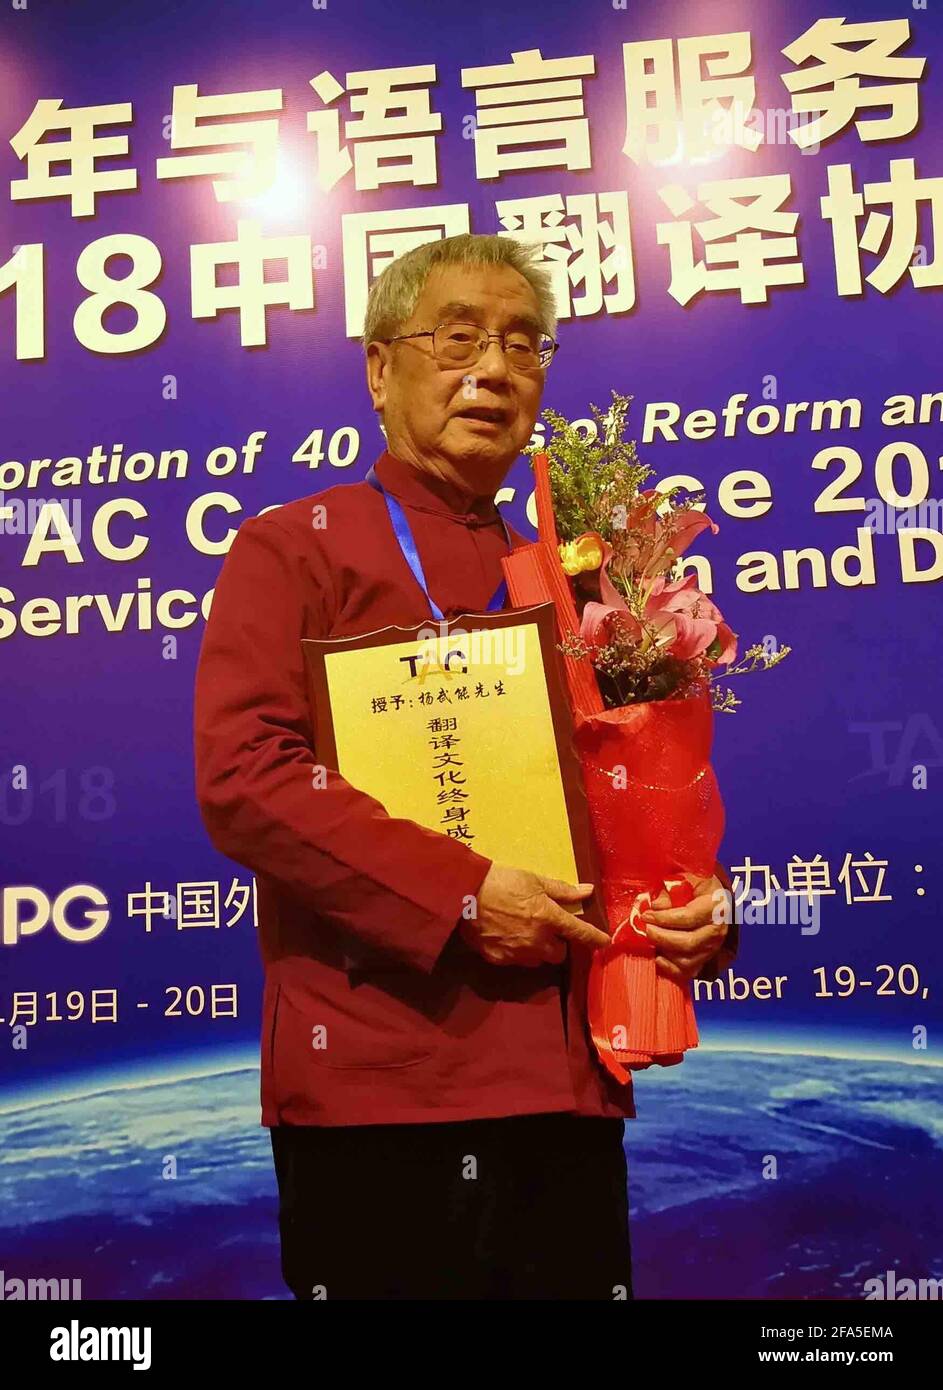 (210423) -- CHENGDU, April 23, 2021 (Xinhua) -- File photo taken on Nov. 19, 2018 shows Yang Wuneng posing after receiving the Lifetime Achievement Award in Translation in Beijing, capital of China. In a career that spans over 60 years, Yang Wuneng has translated 31 German classics into the Chinese language, including 'Faust', 'Selected Poems of Heinrich Heine' and 'Immensee.' Many of his translations are still bestselling books in some bookstores. His translation of 'Grimms' Fairy Tales,' for instance, has been popular among Chinese readers for many generations. Today, Yang is still an active Stock Photo